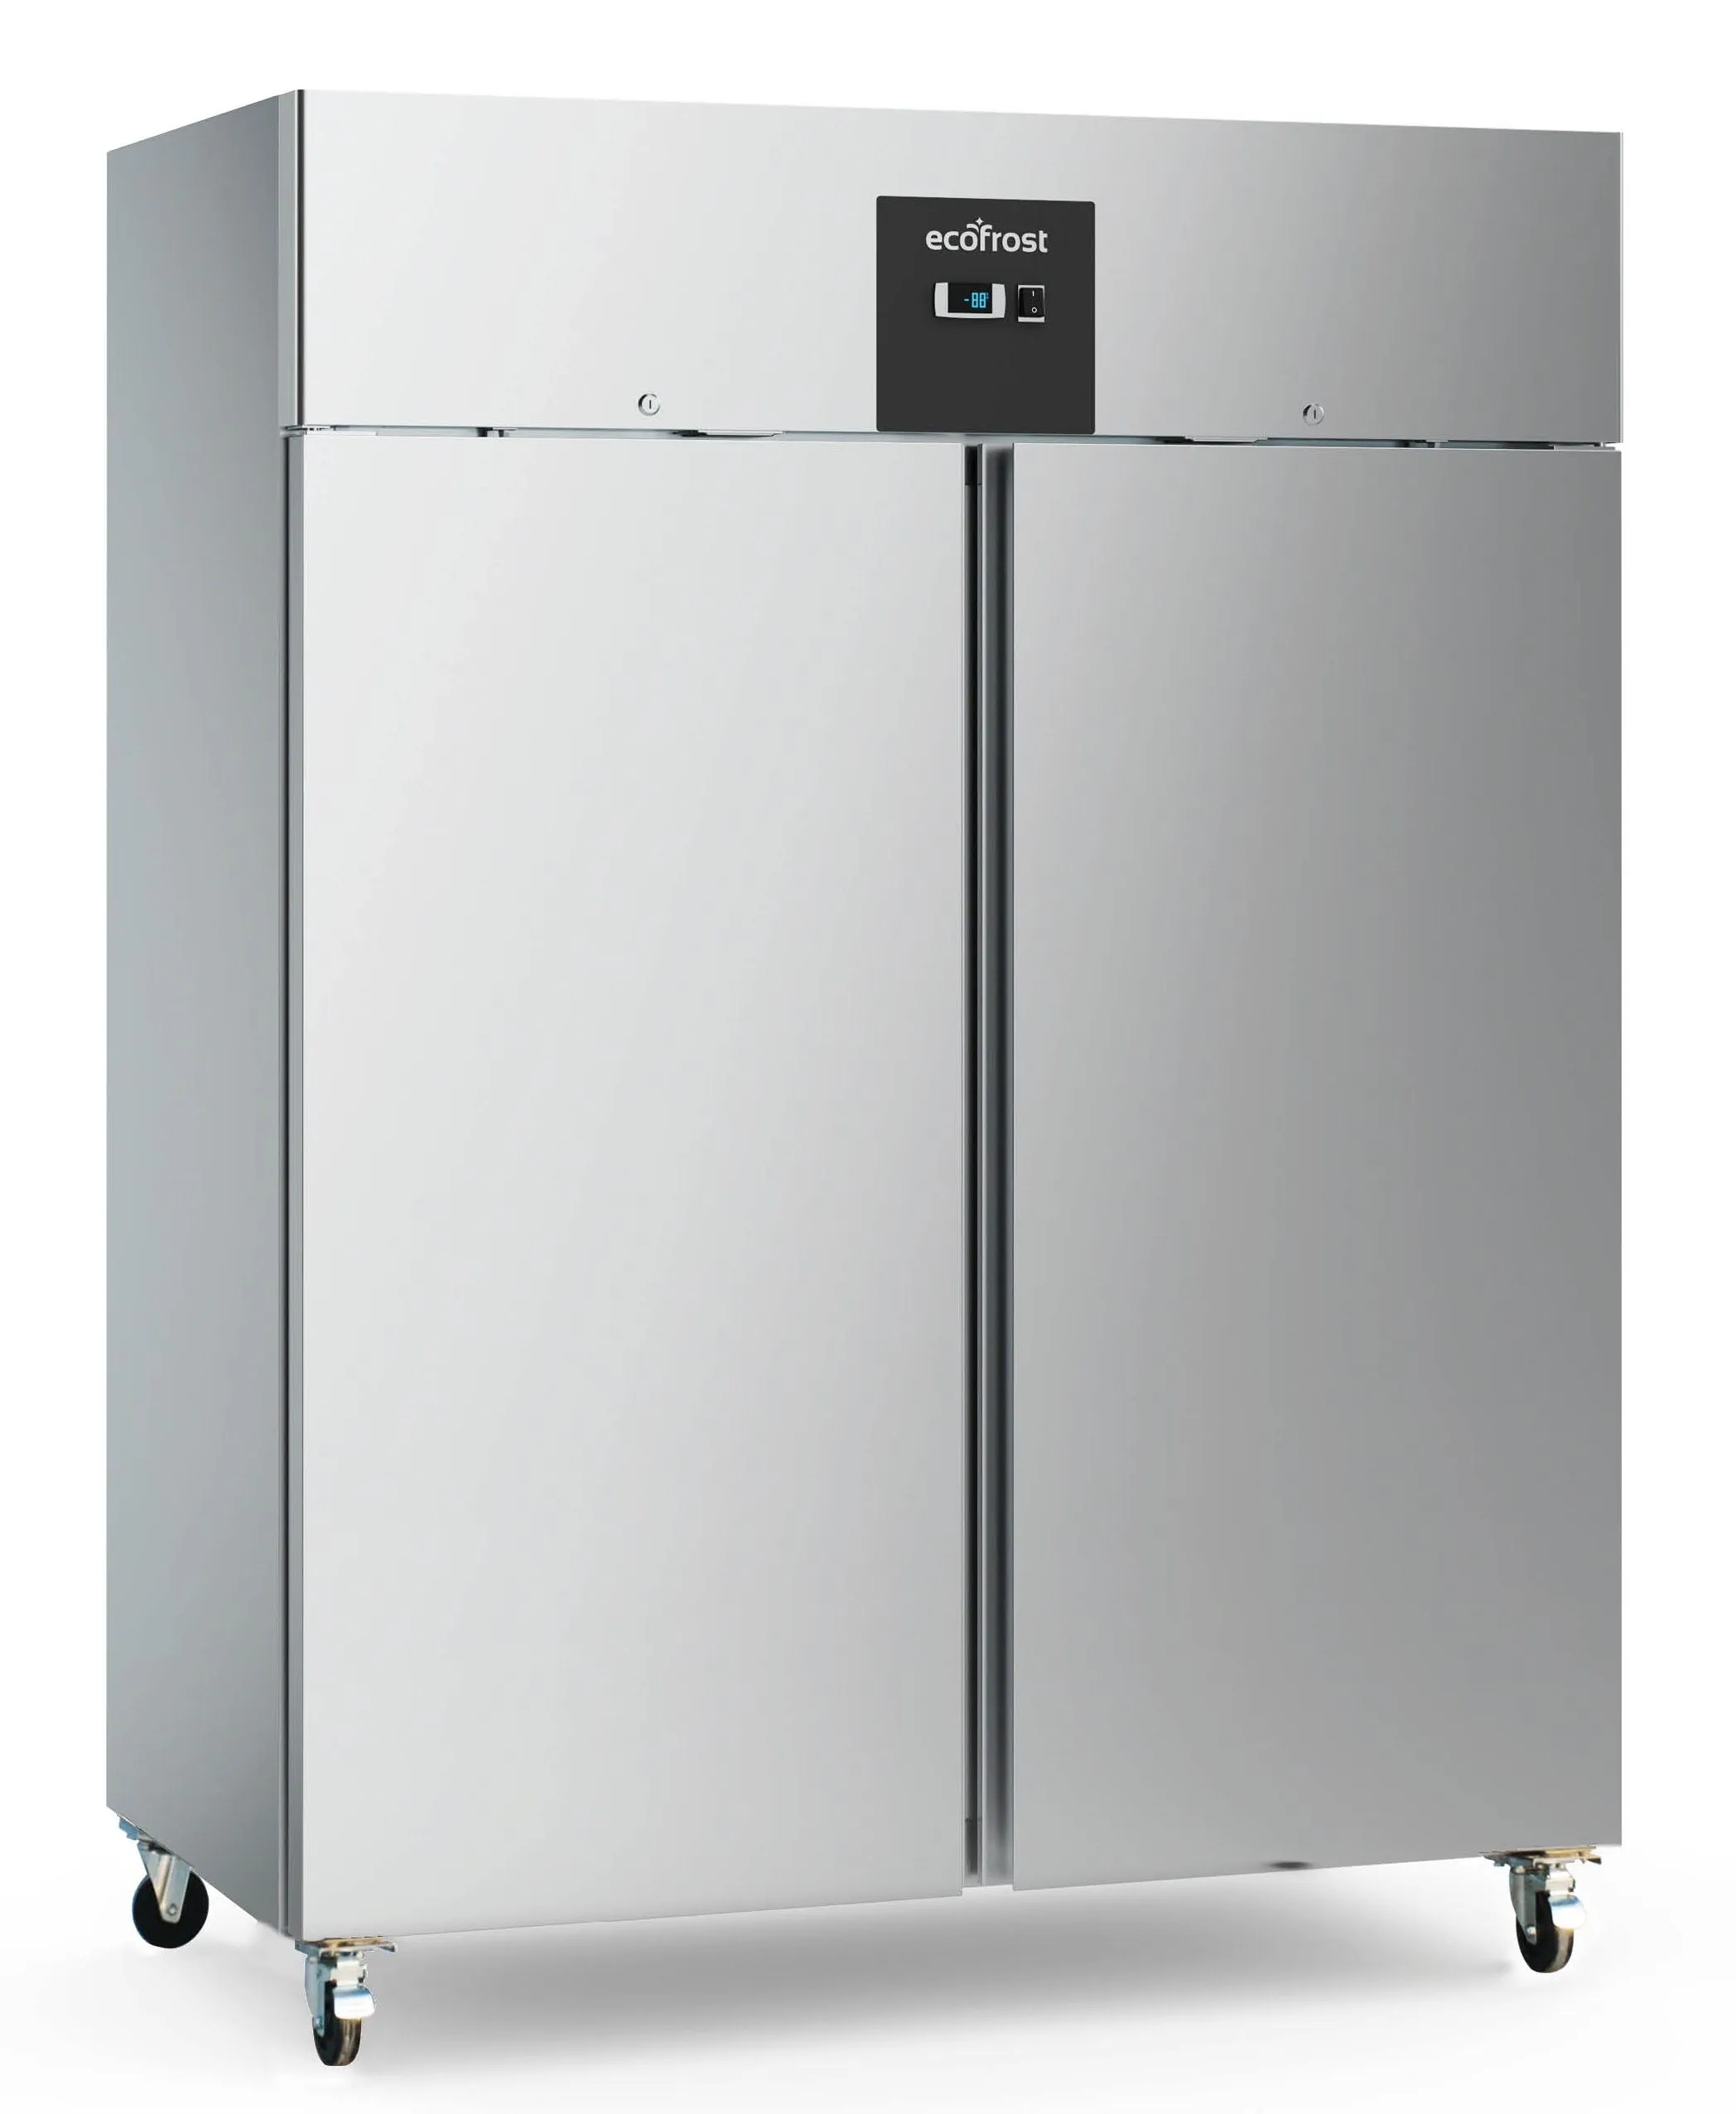 Ecofrost Stainless Steel Freezer 1300 Litre Ventilated